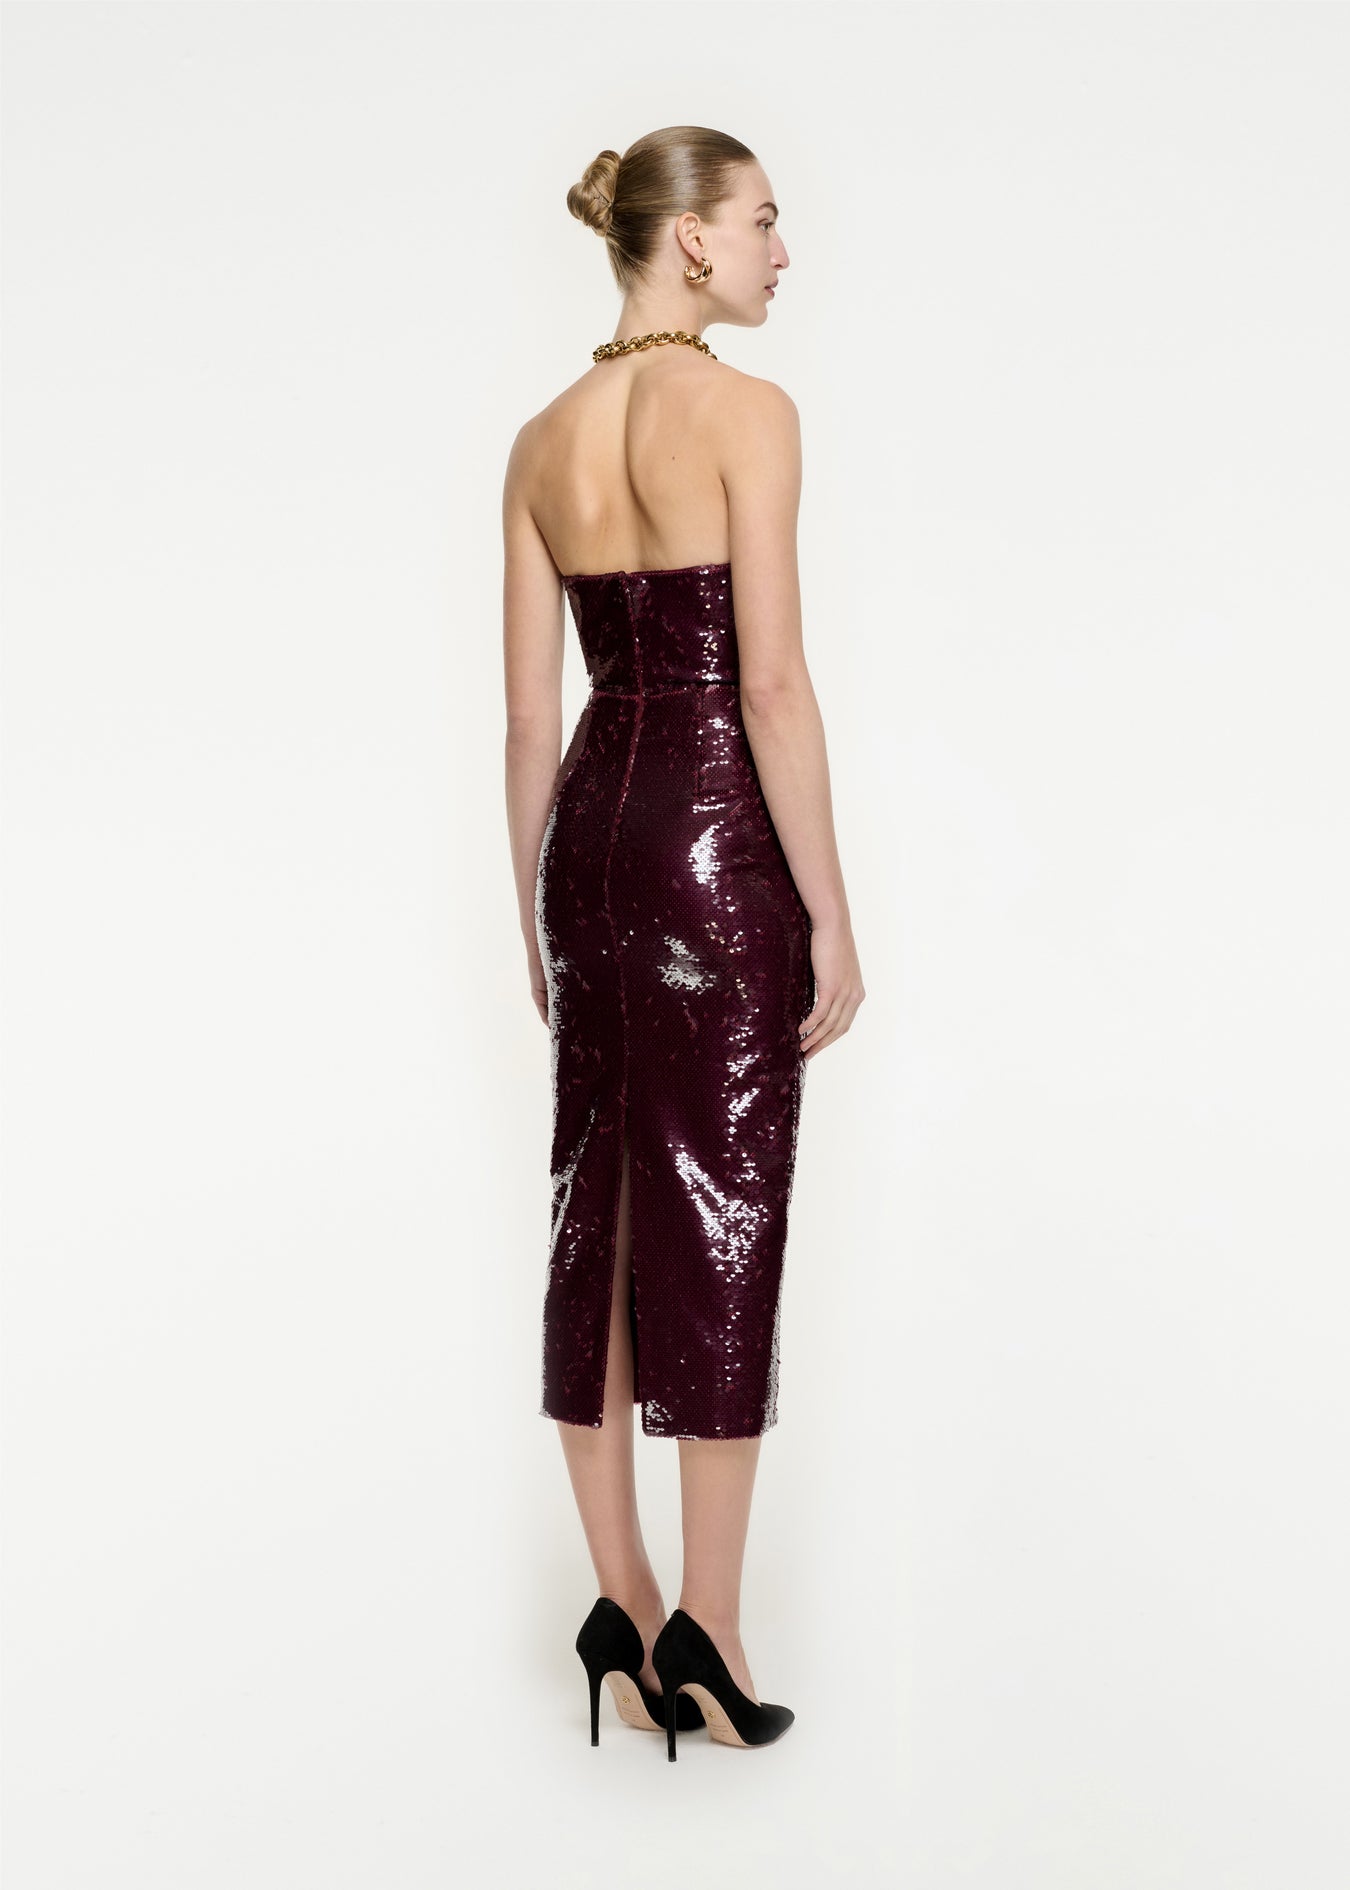 The back of a woman wearing the Strapless Sequin Midi Dress in Maroon